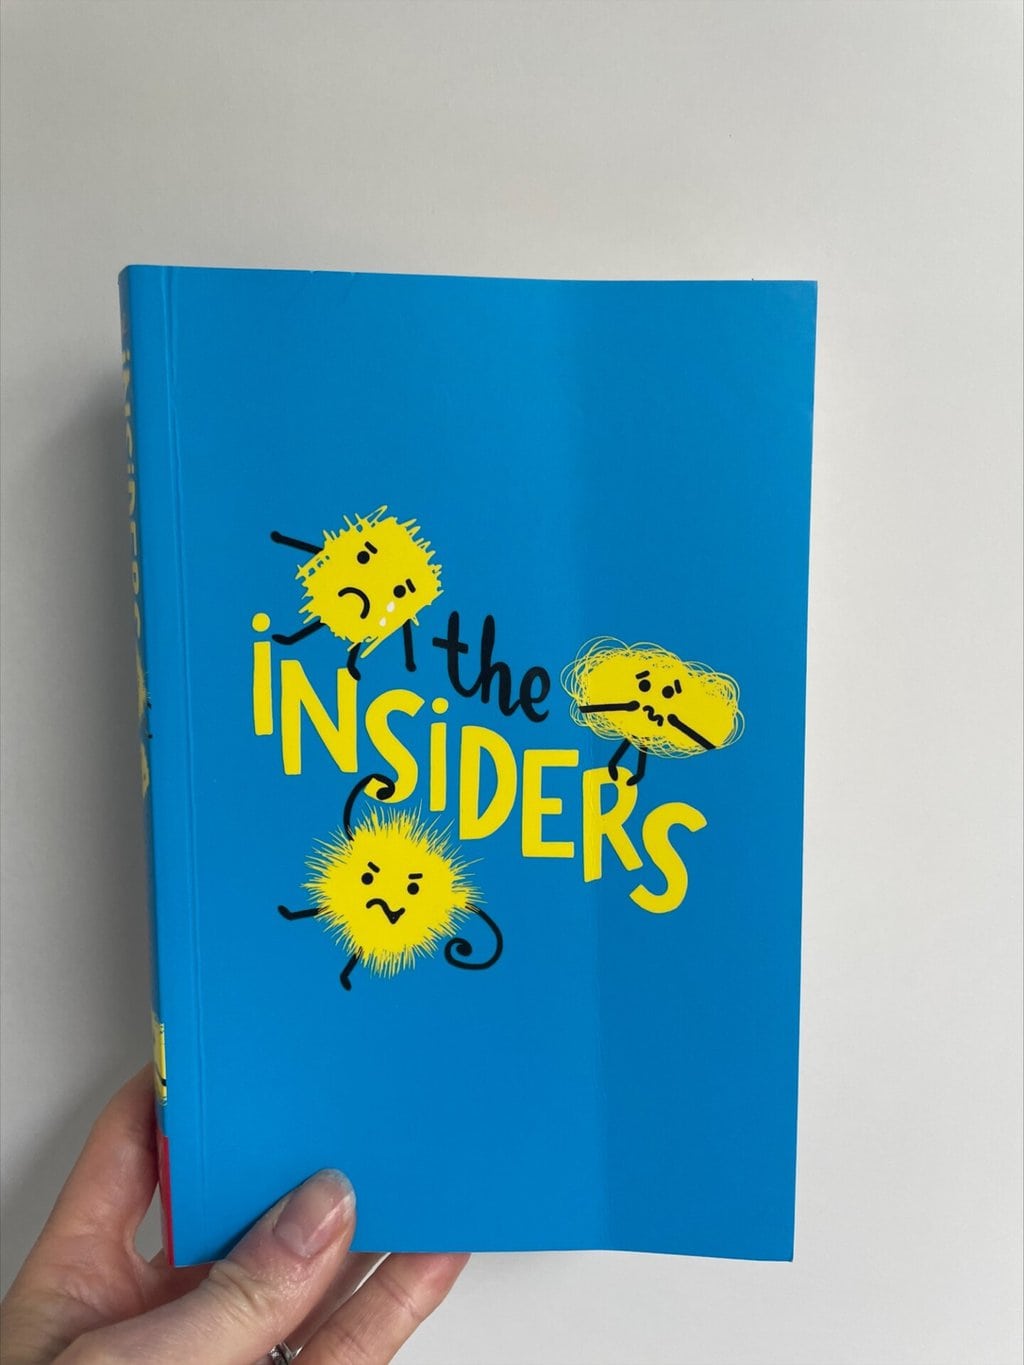 The Insiders – Cath Howe (author), Nosy Crow Ltd (publisher) (recommended reading age: 9 plus)